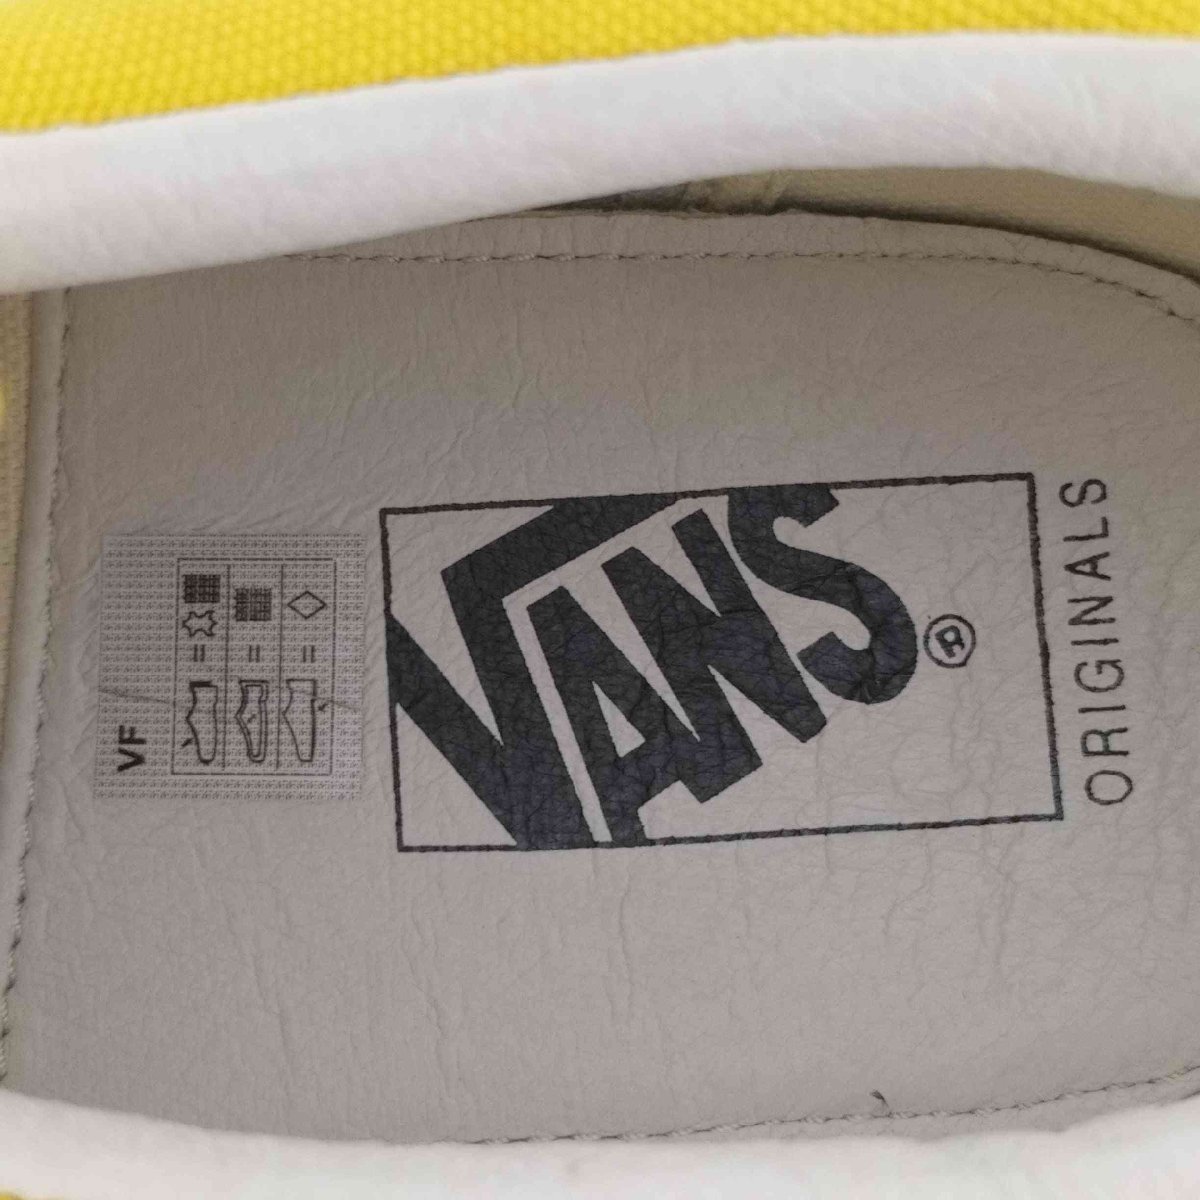 VANS(バンズ) スタイル36 OG STYLE 36 (Suede/Canvas) Old Gold/ 中古 古着 0703_画像6